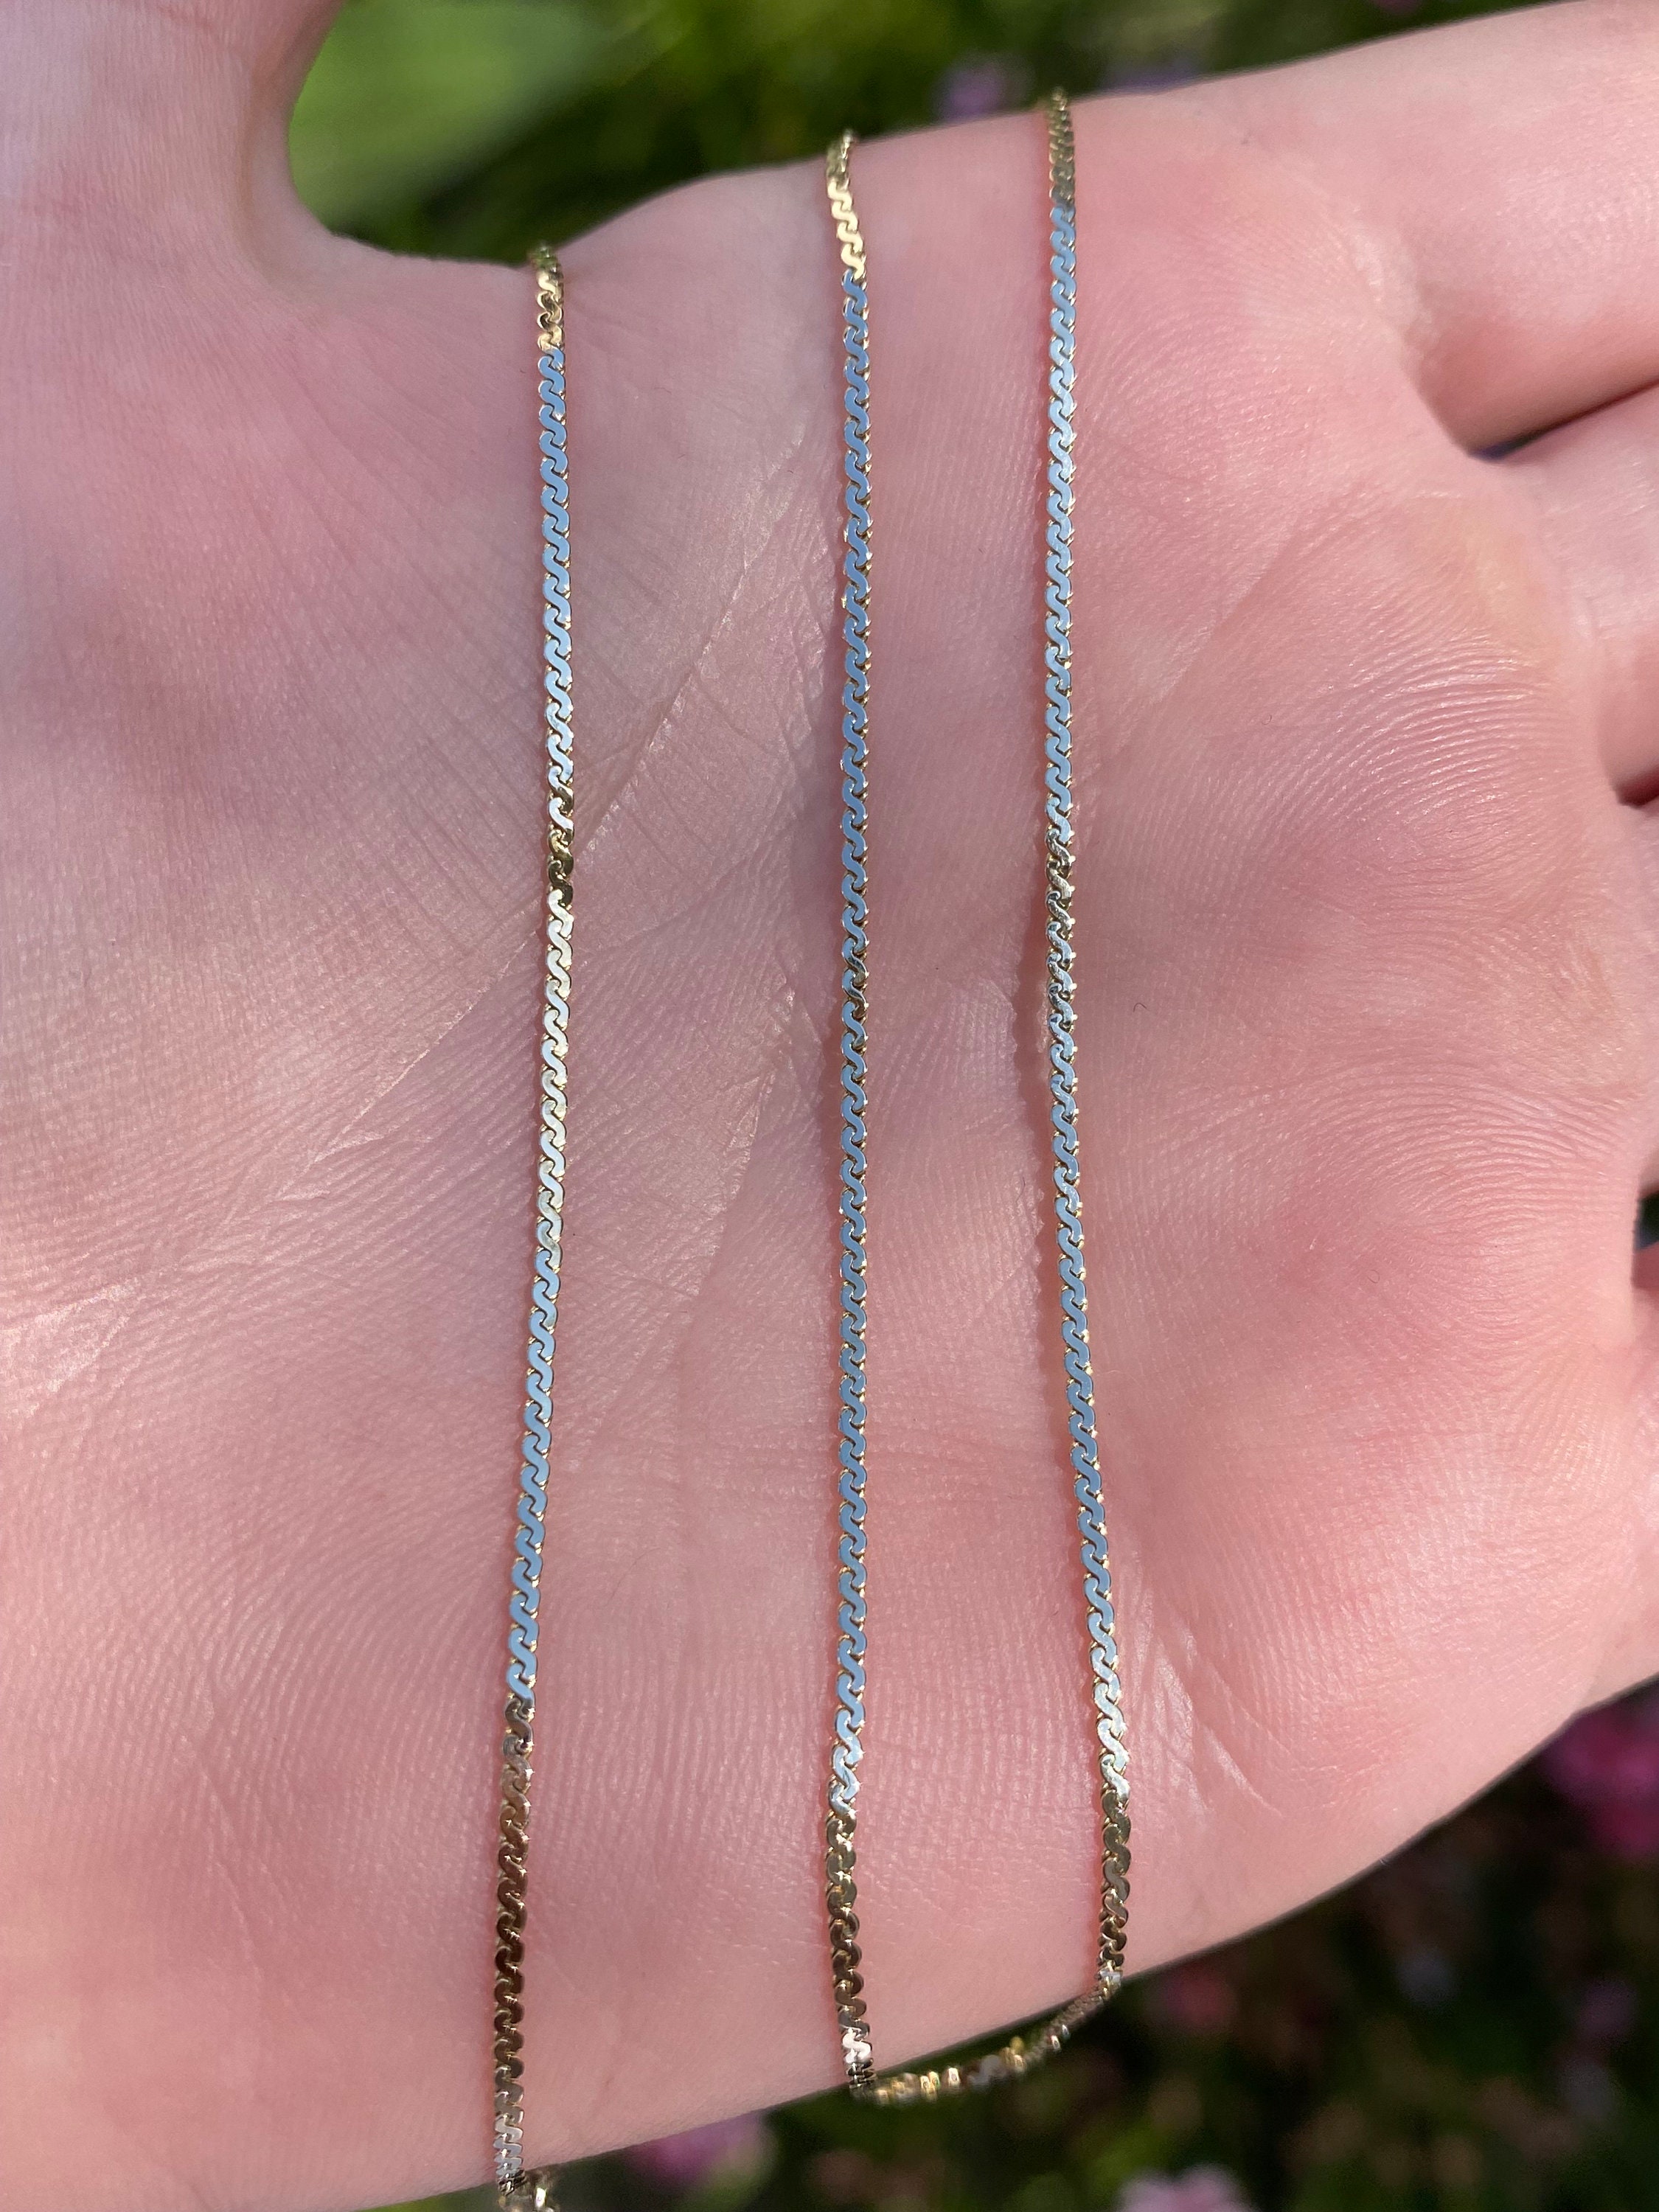 14K Rose Gold Filled Chain - 16 inch 14/20 GF Necklace - 1.2 mm Flat Dainty Cable Chain Spring Ring Clasp - Pink GF 16 New Jewelry Supply